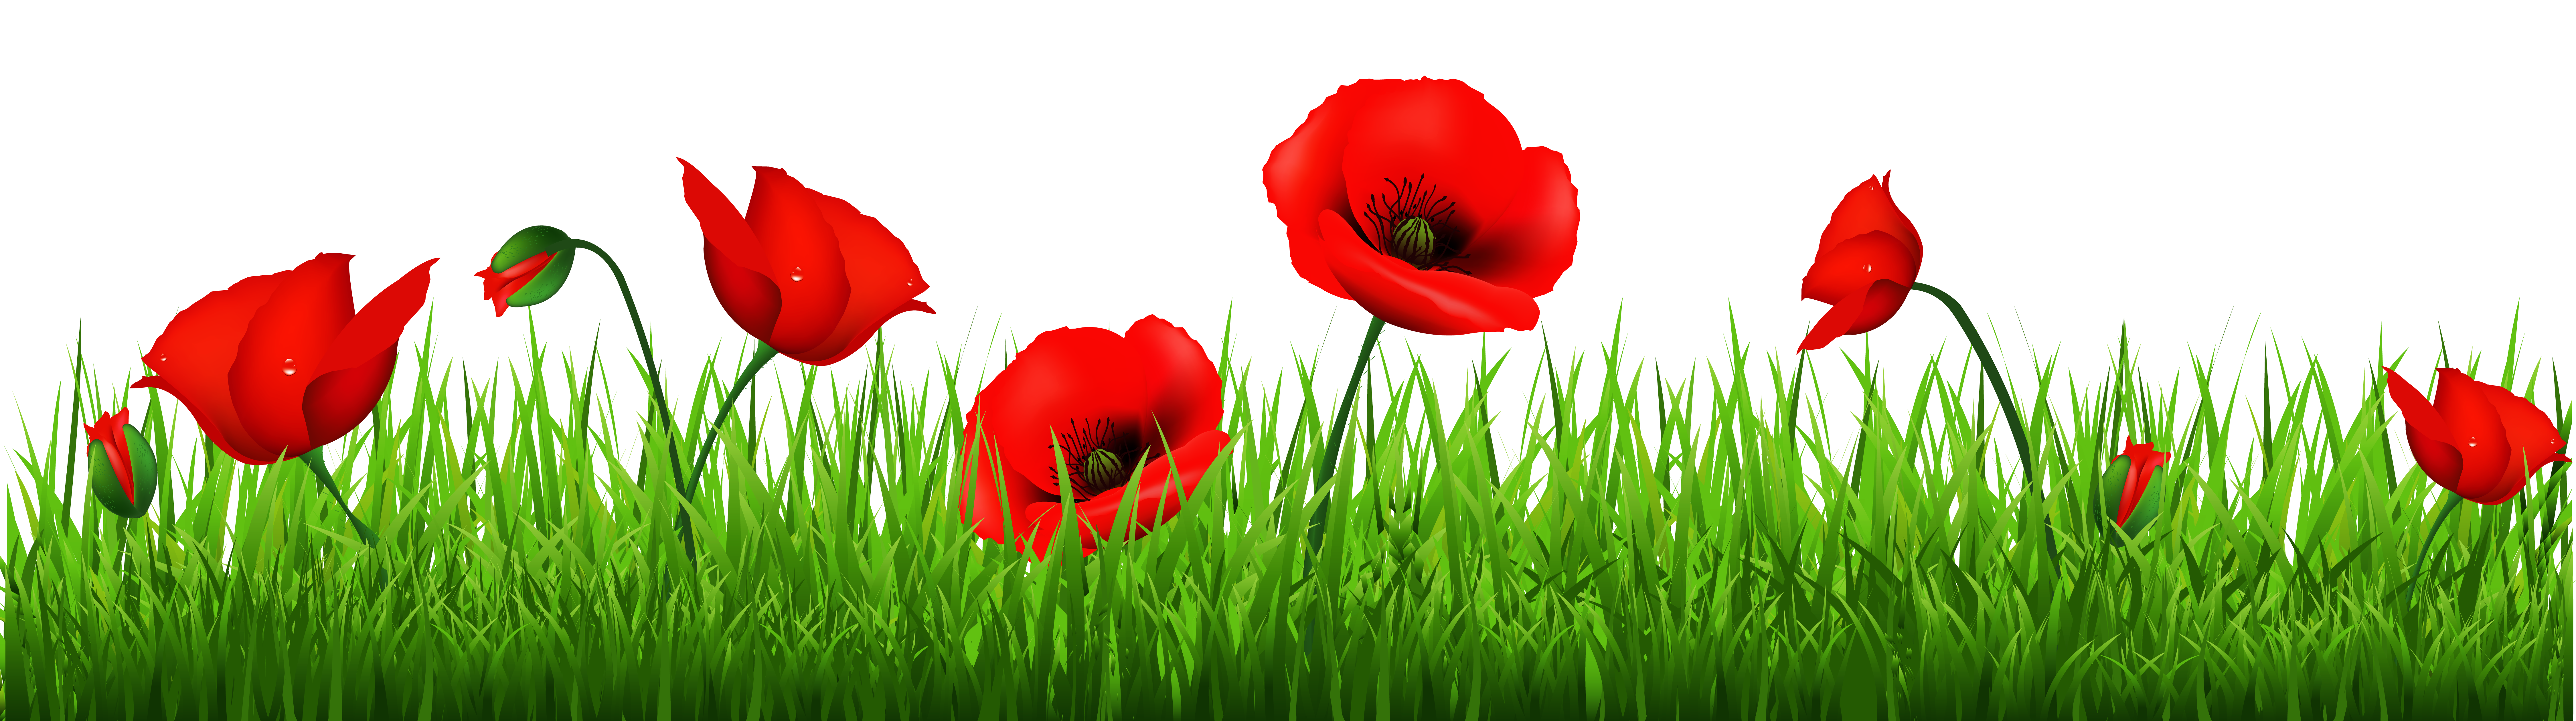 Grass with Beautiful Poppies PNG Clipart 